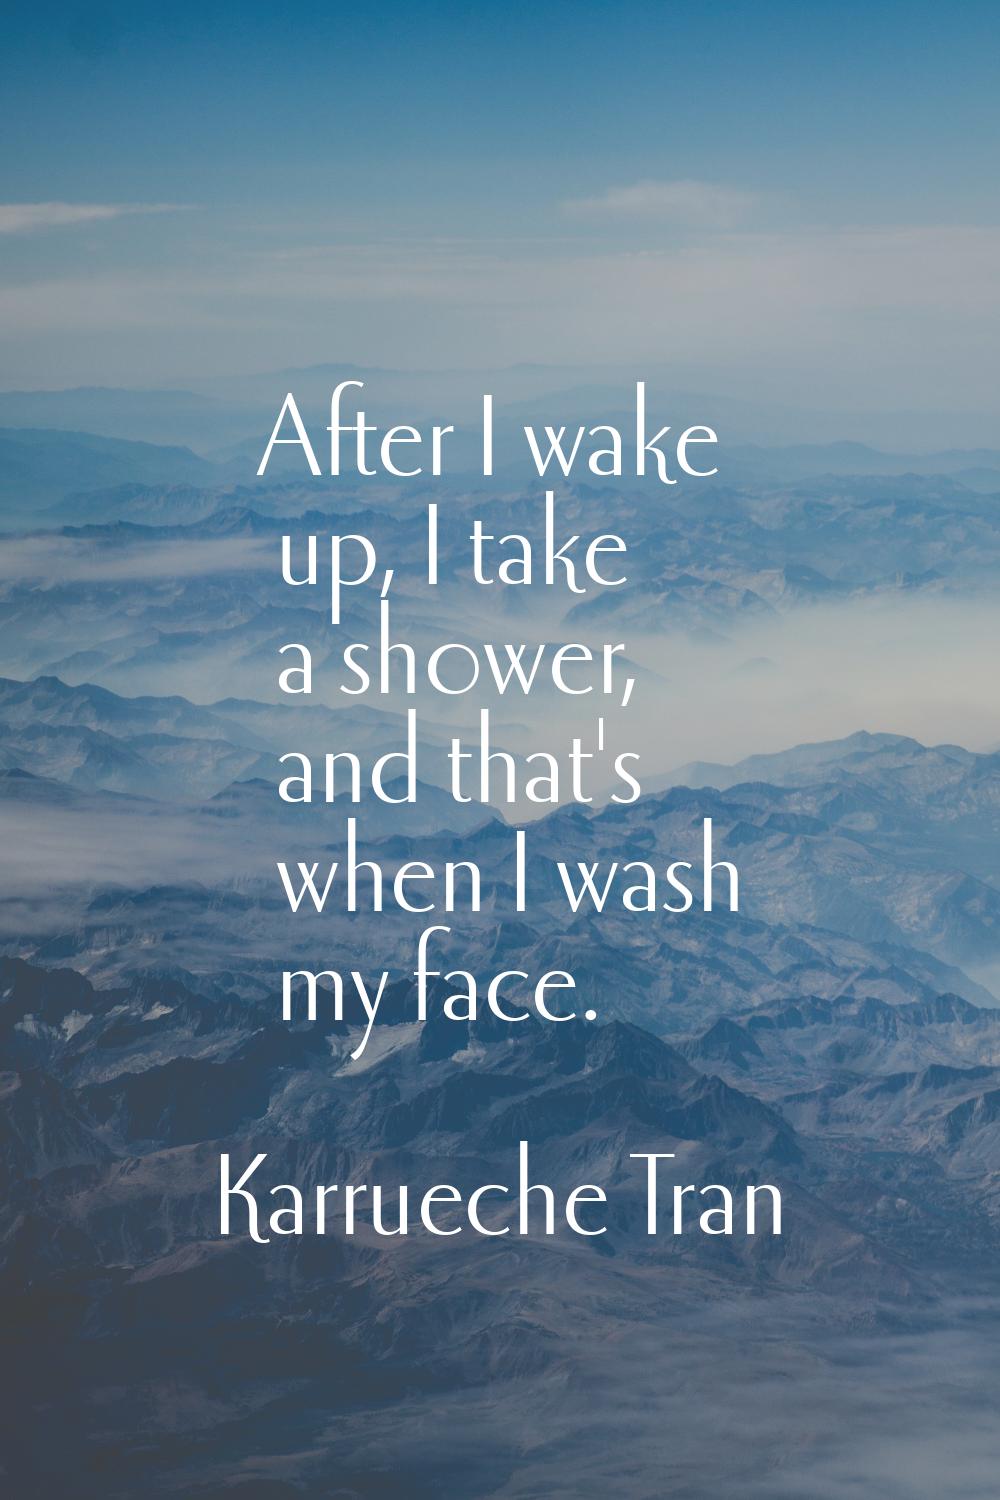 After I wake up, I take a shower, and that's when I wash my face.